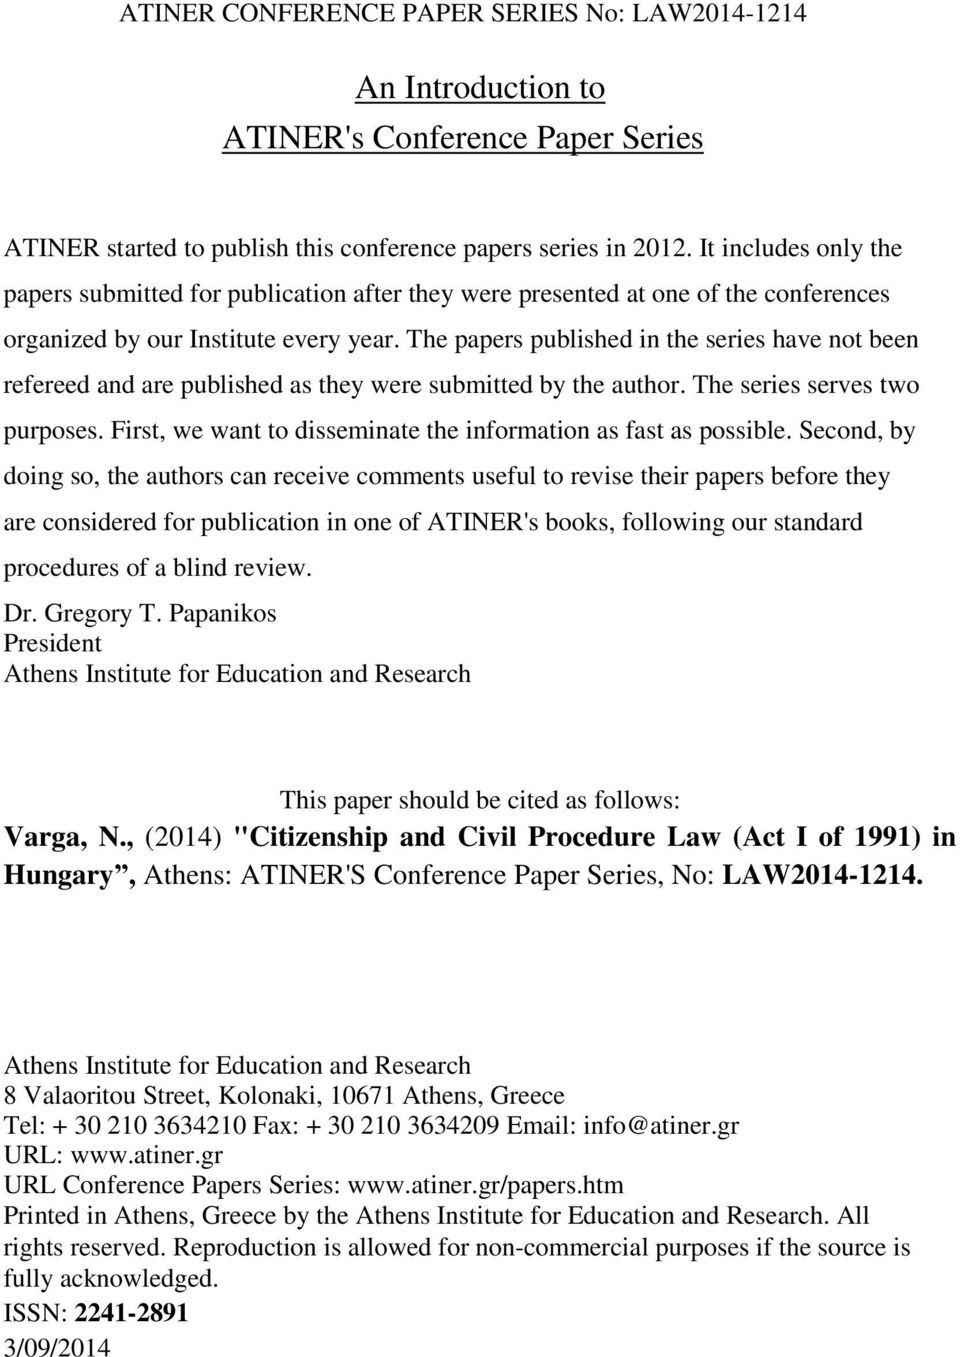 The papers published in the series have not been refereed and are published as they were submitted by the author. The series serves two purposes.